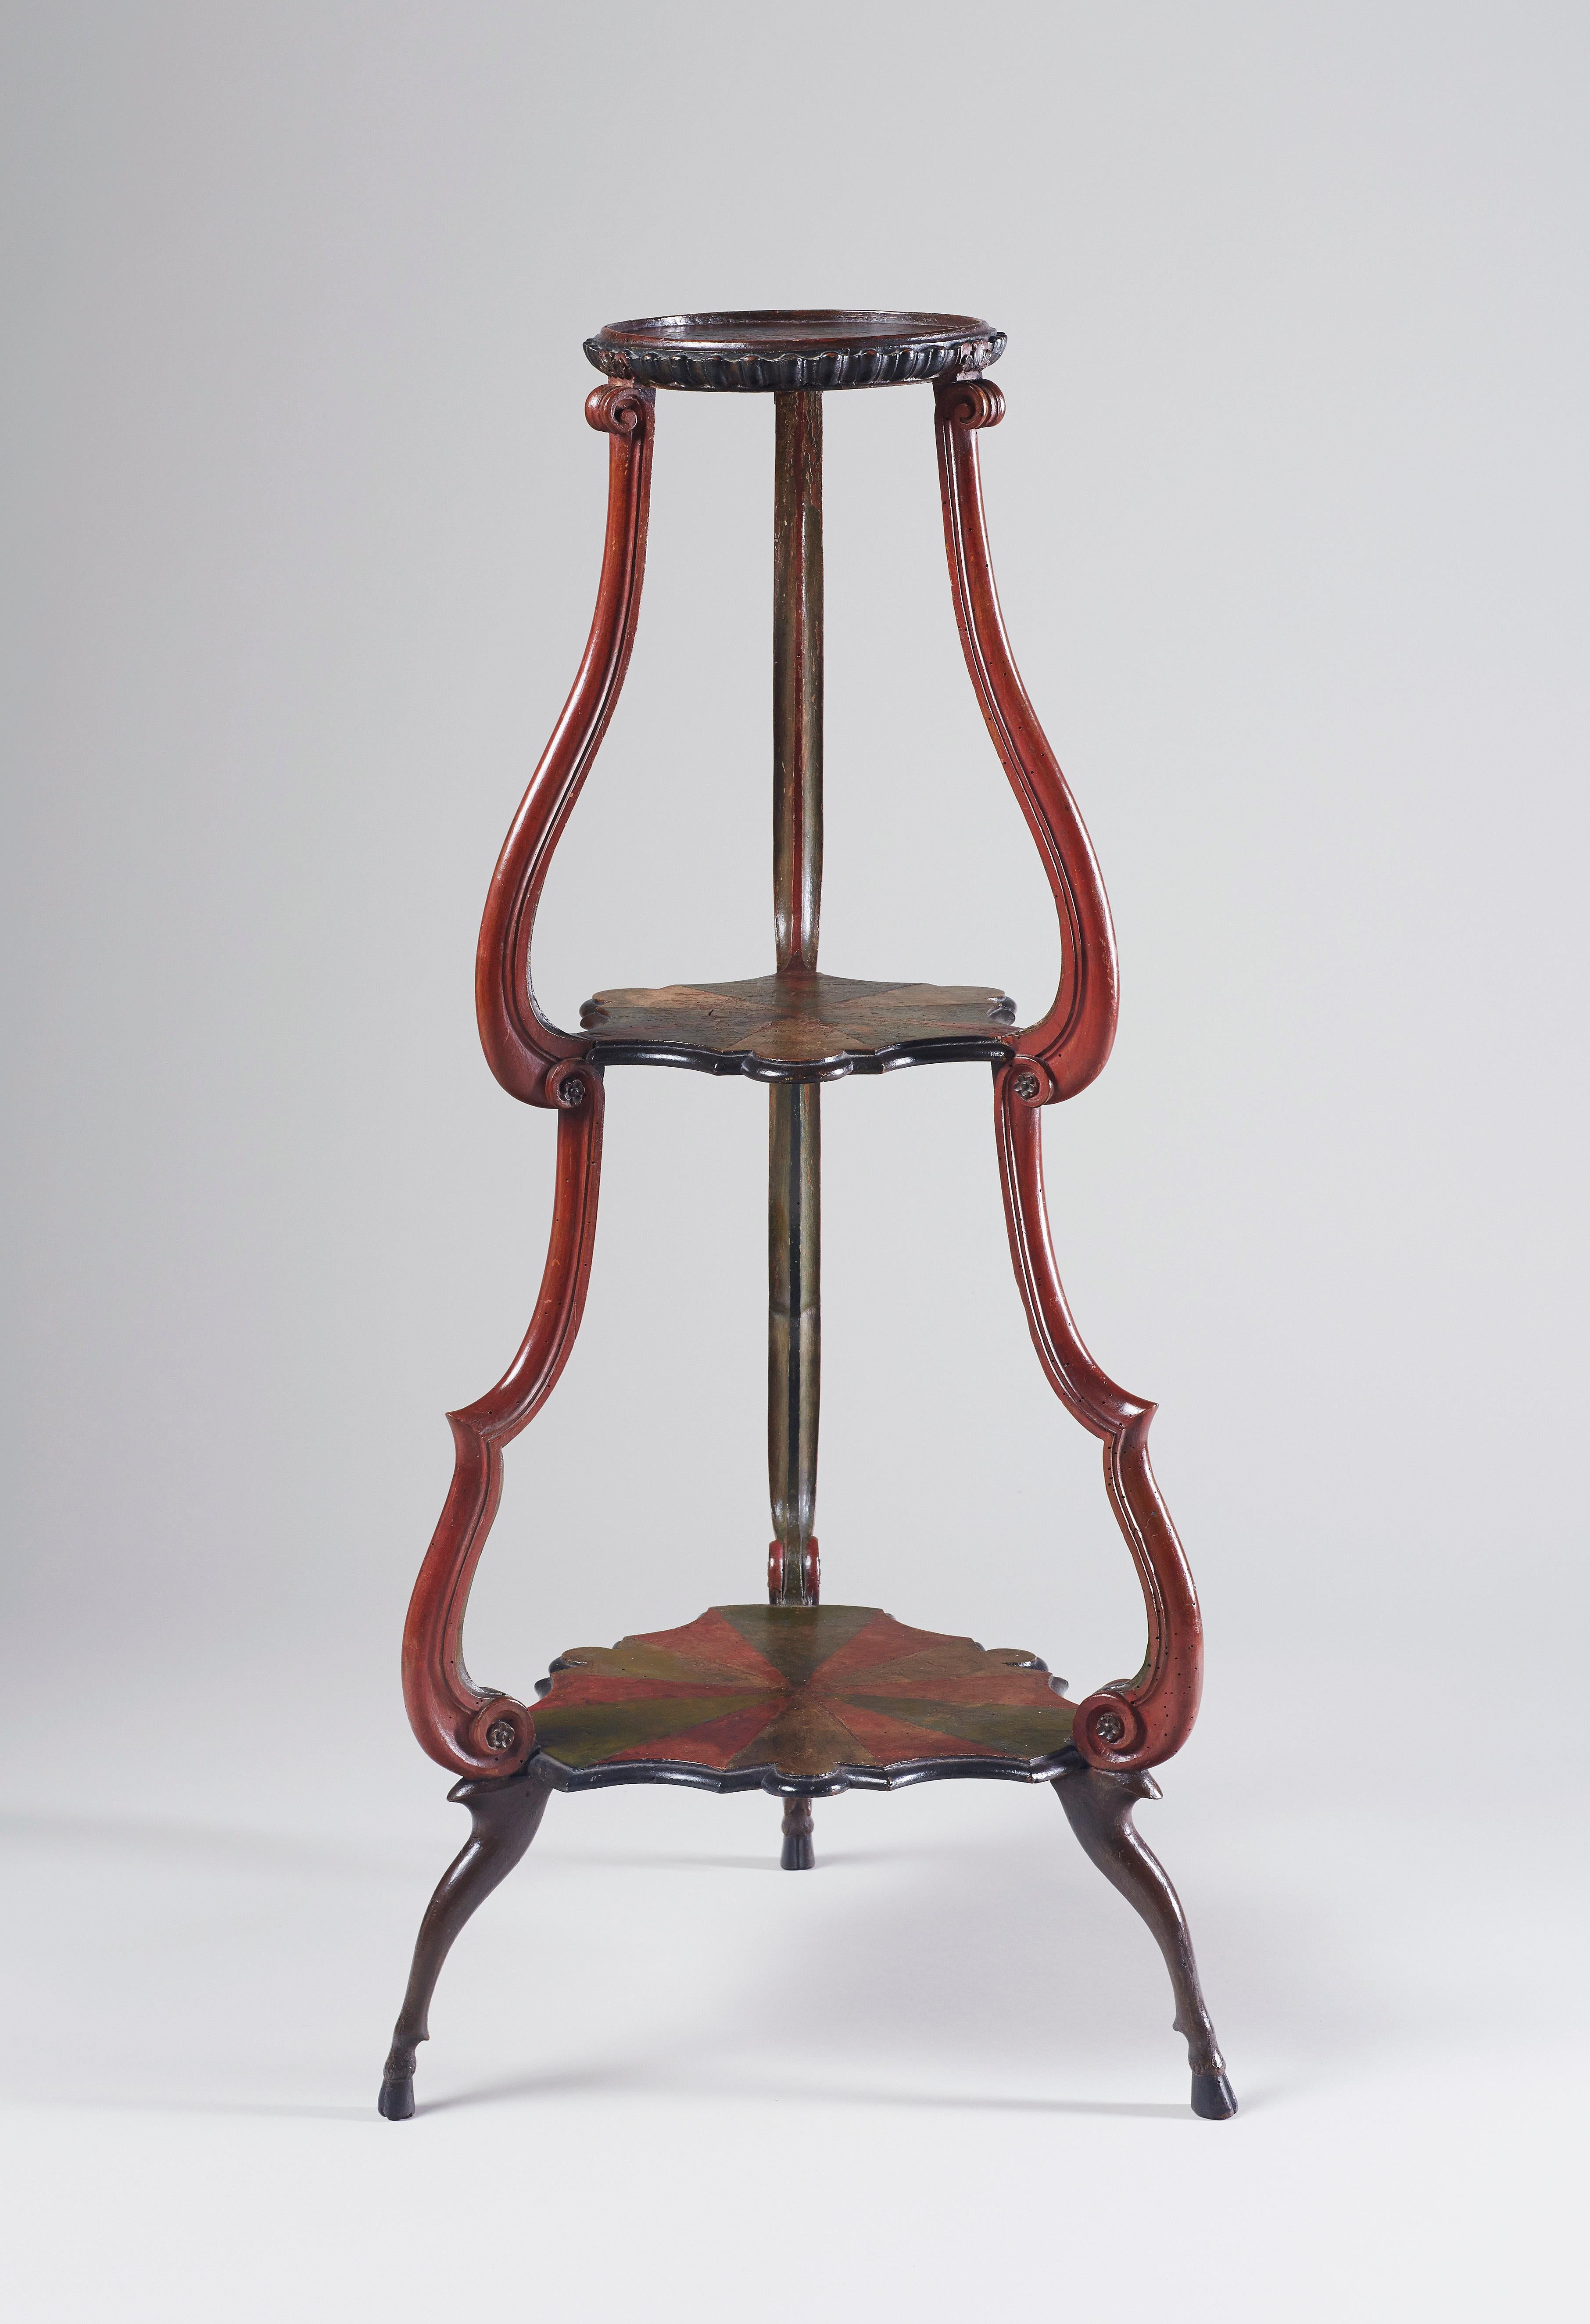 Unusual and very decorative three-tier étagère or guéridon of tapering form supported by three hoof feet. With its original polychrome paint.

This guéridon is very elegant with its subtle colourfulness, yet an unusual eye-catcher in any interior.